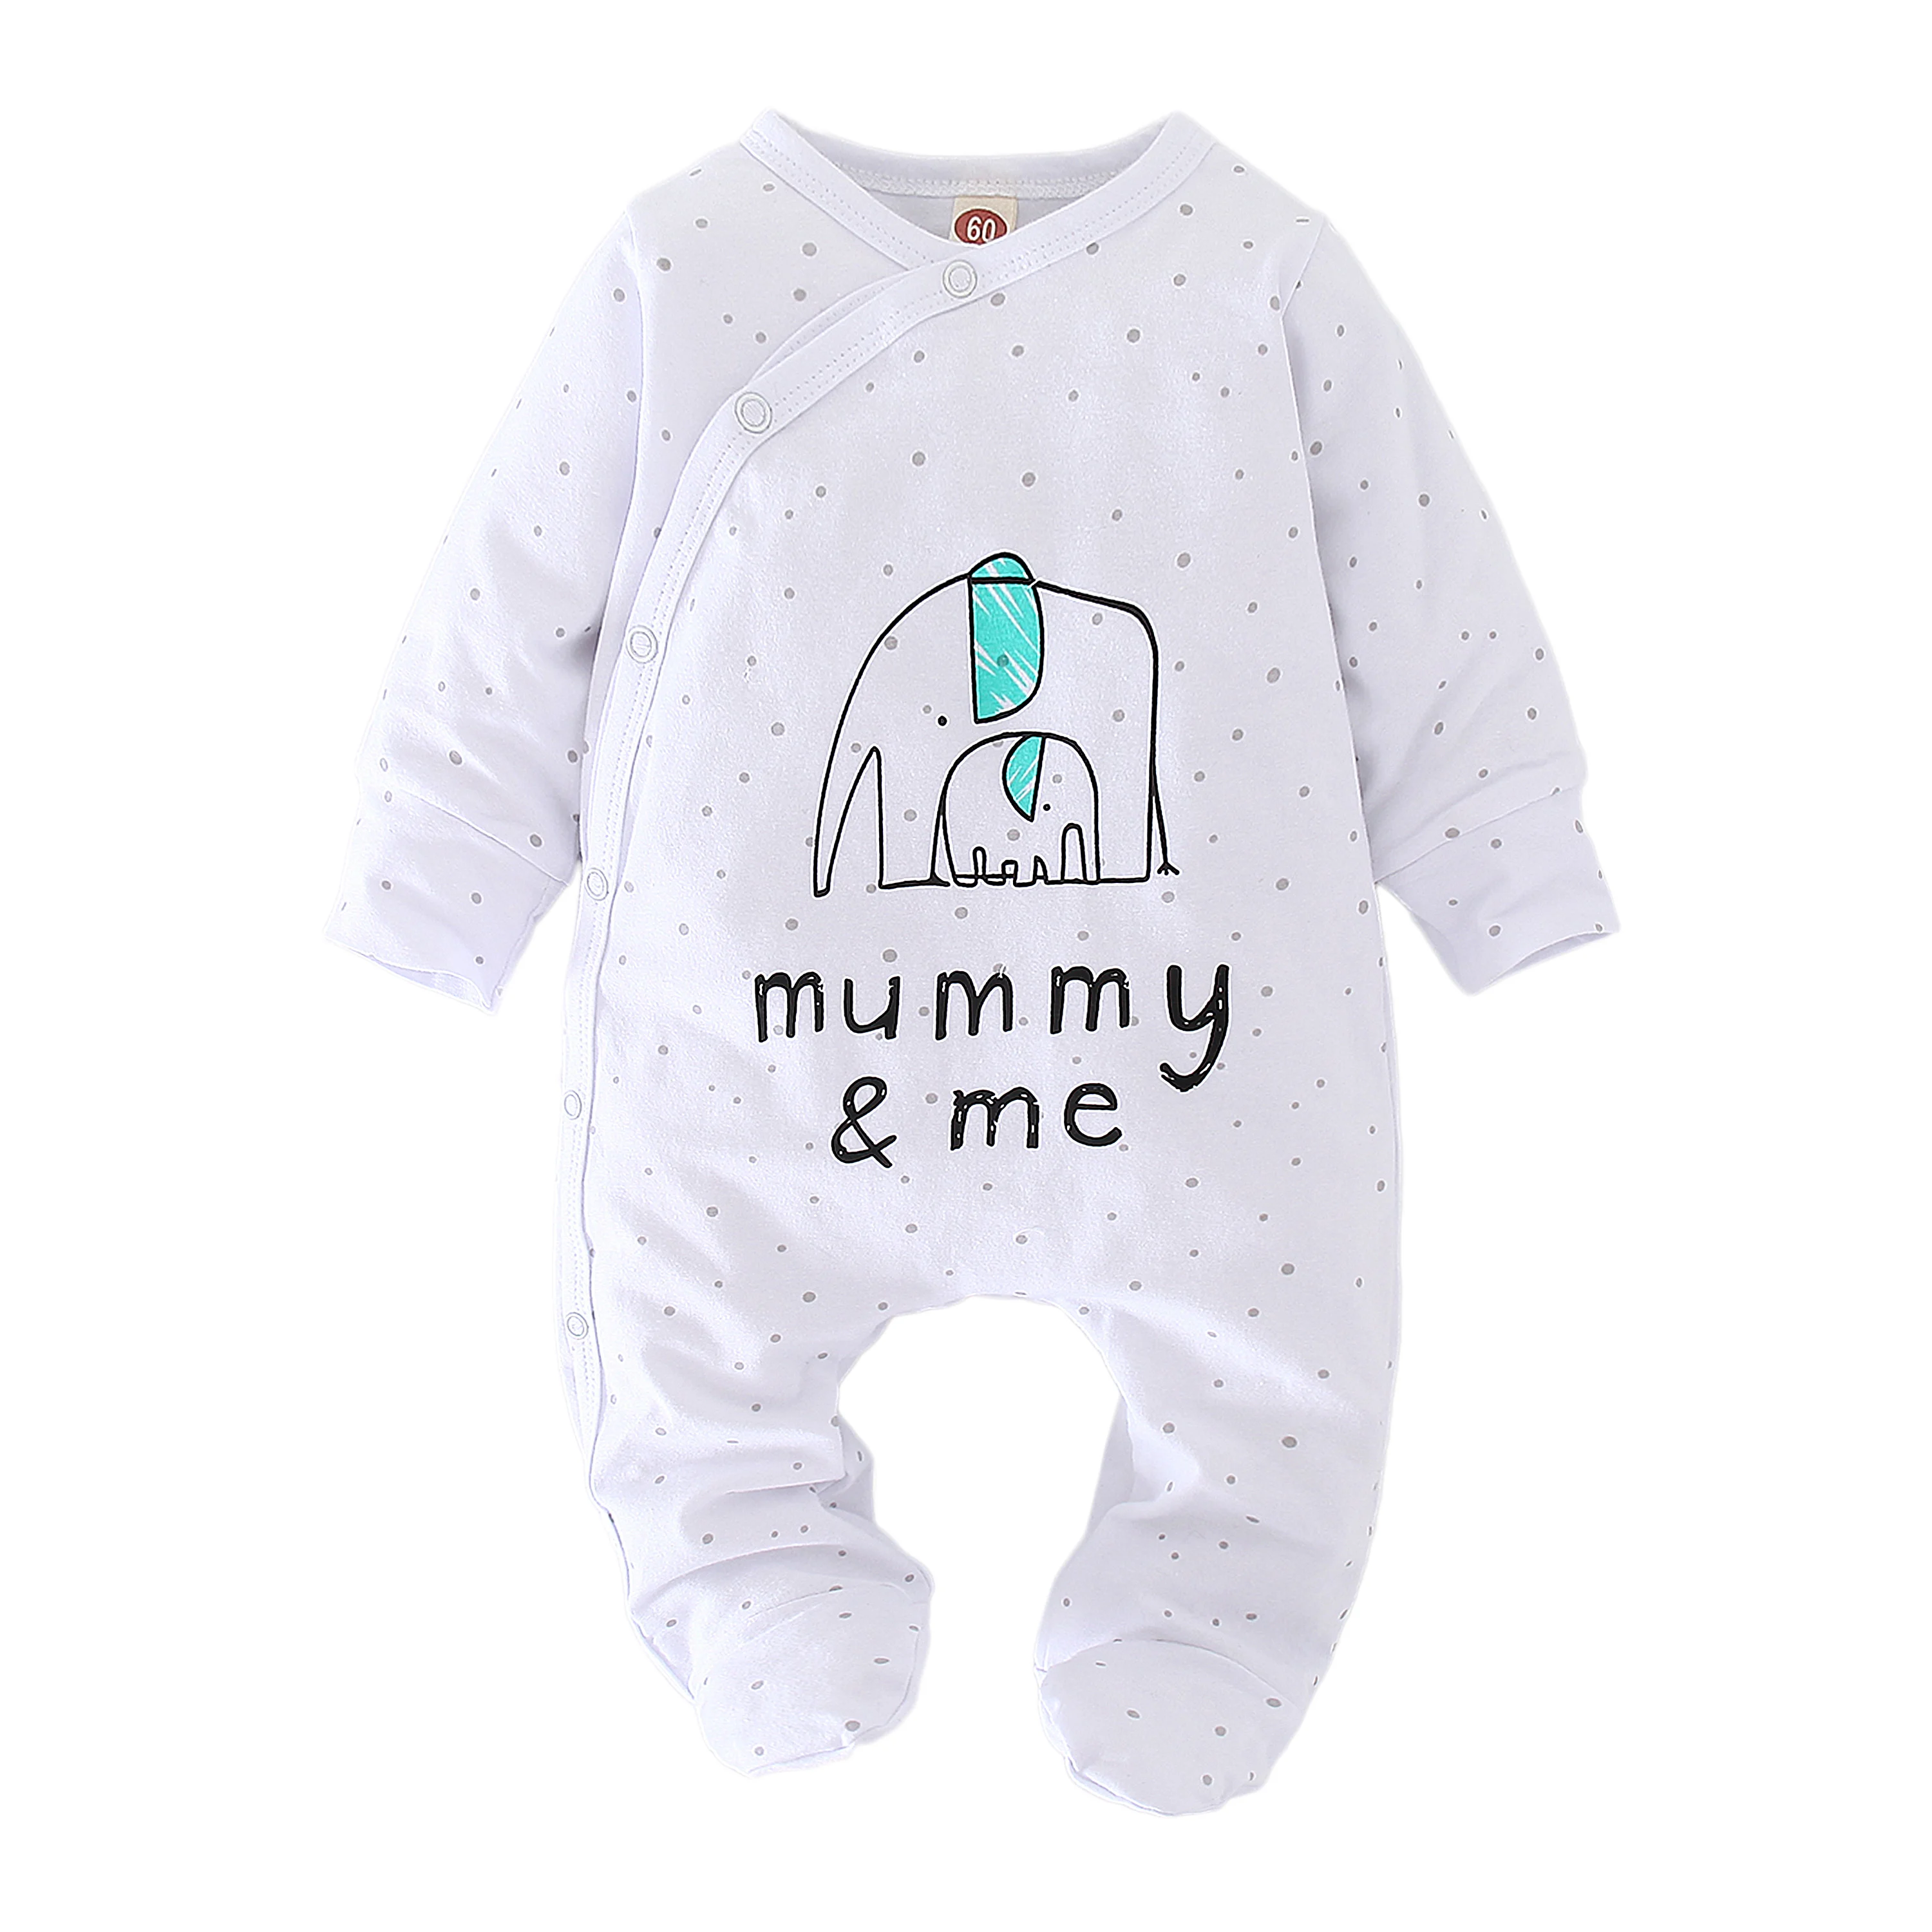 baby bodysuit dress Newborn Baby Boy Girl Romper Long Sleeve Cotton Letter I Love Daddy & Mummy Animal Print Jumpsuit Infant Pajama Outfits Bamboo fiber children's clothes Baby Rompers